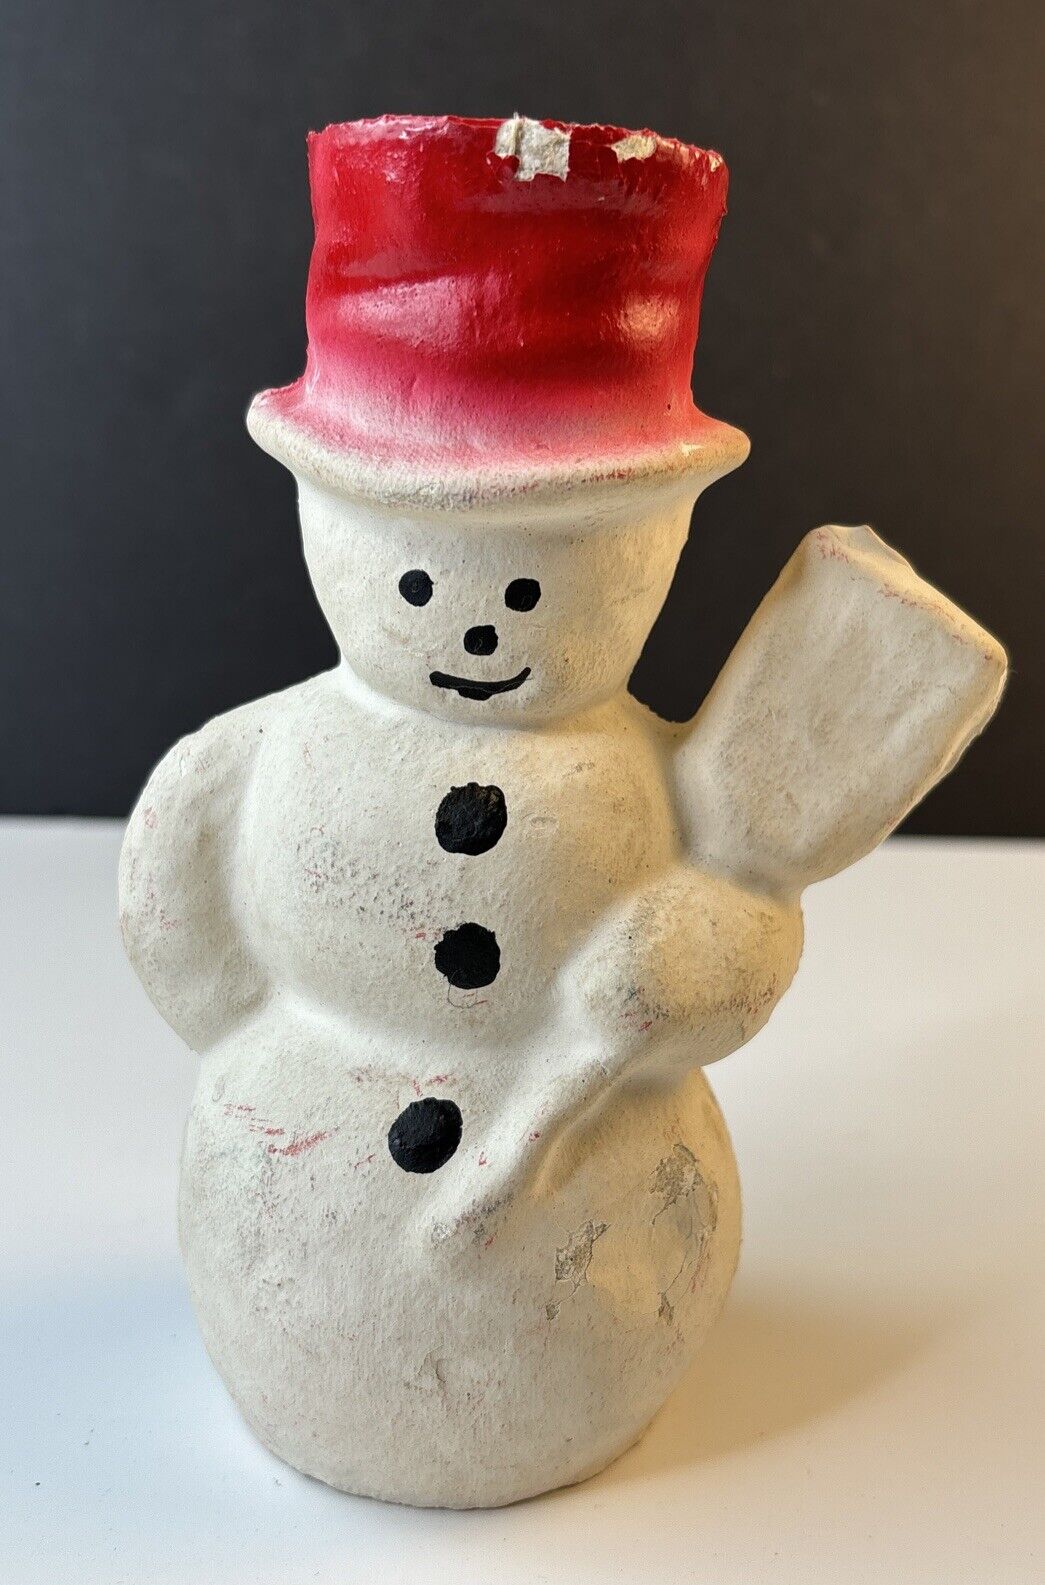 Vintage 1940's Paper Mache Pulp Christmas Snowman w/Broom Candy Container Figure